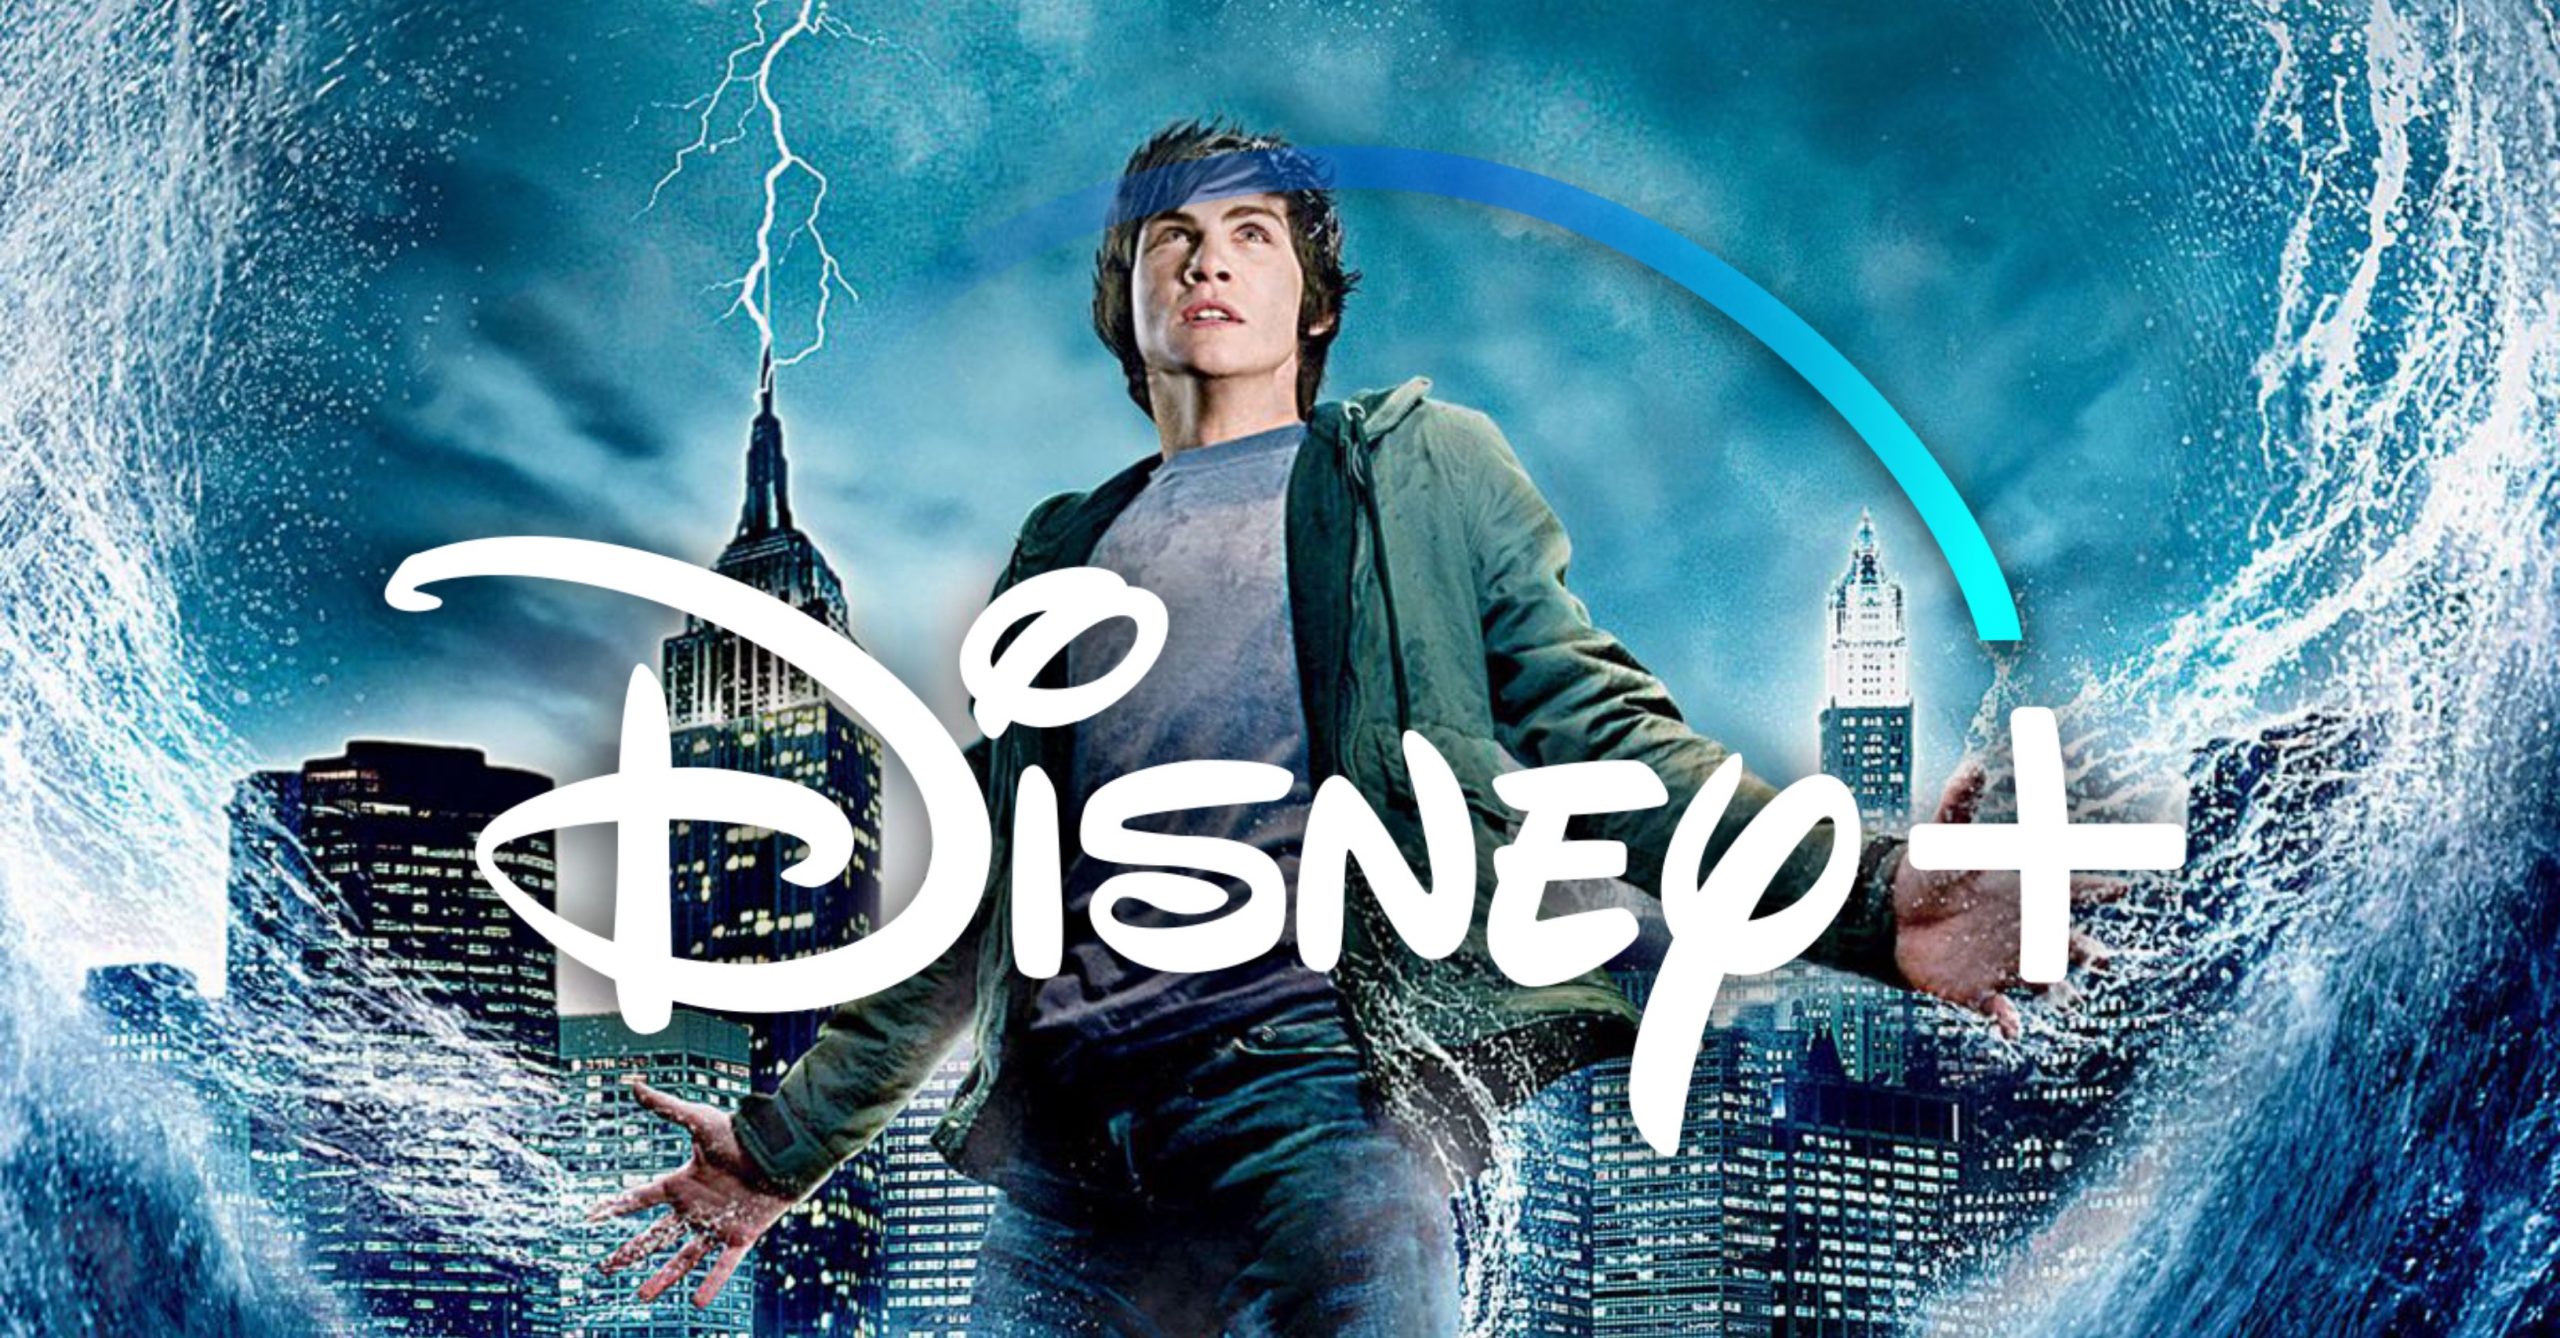 Rick Riordan Shares Update on the ‘Percy Jackson’ Series Coming to Disney+